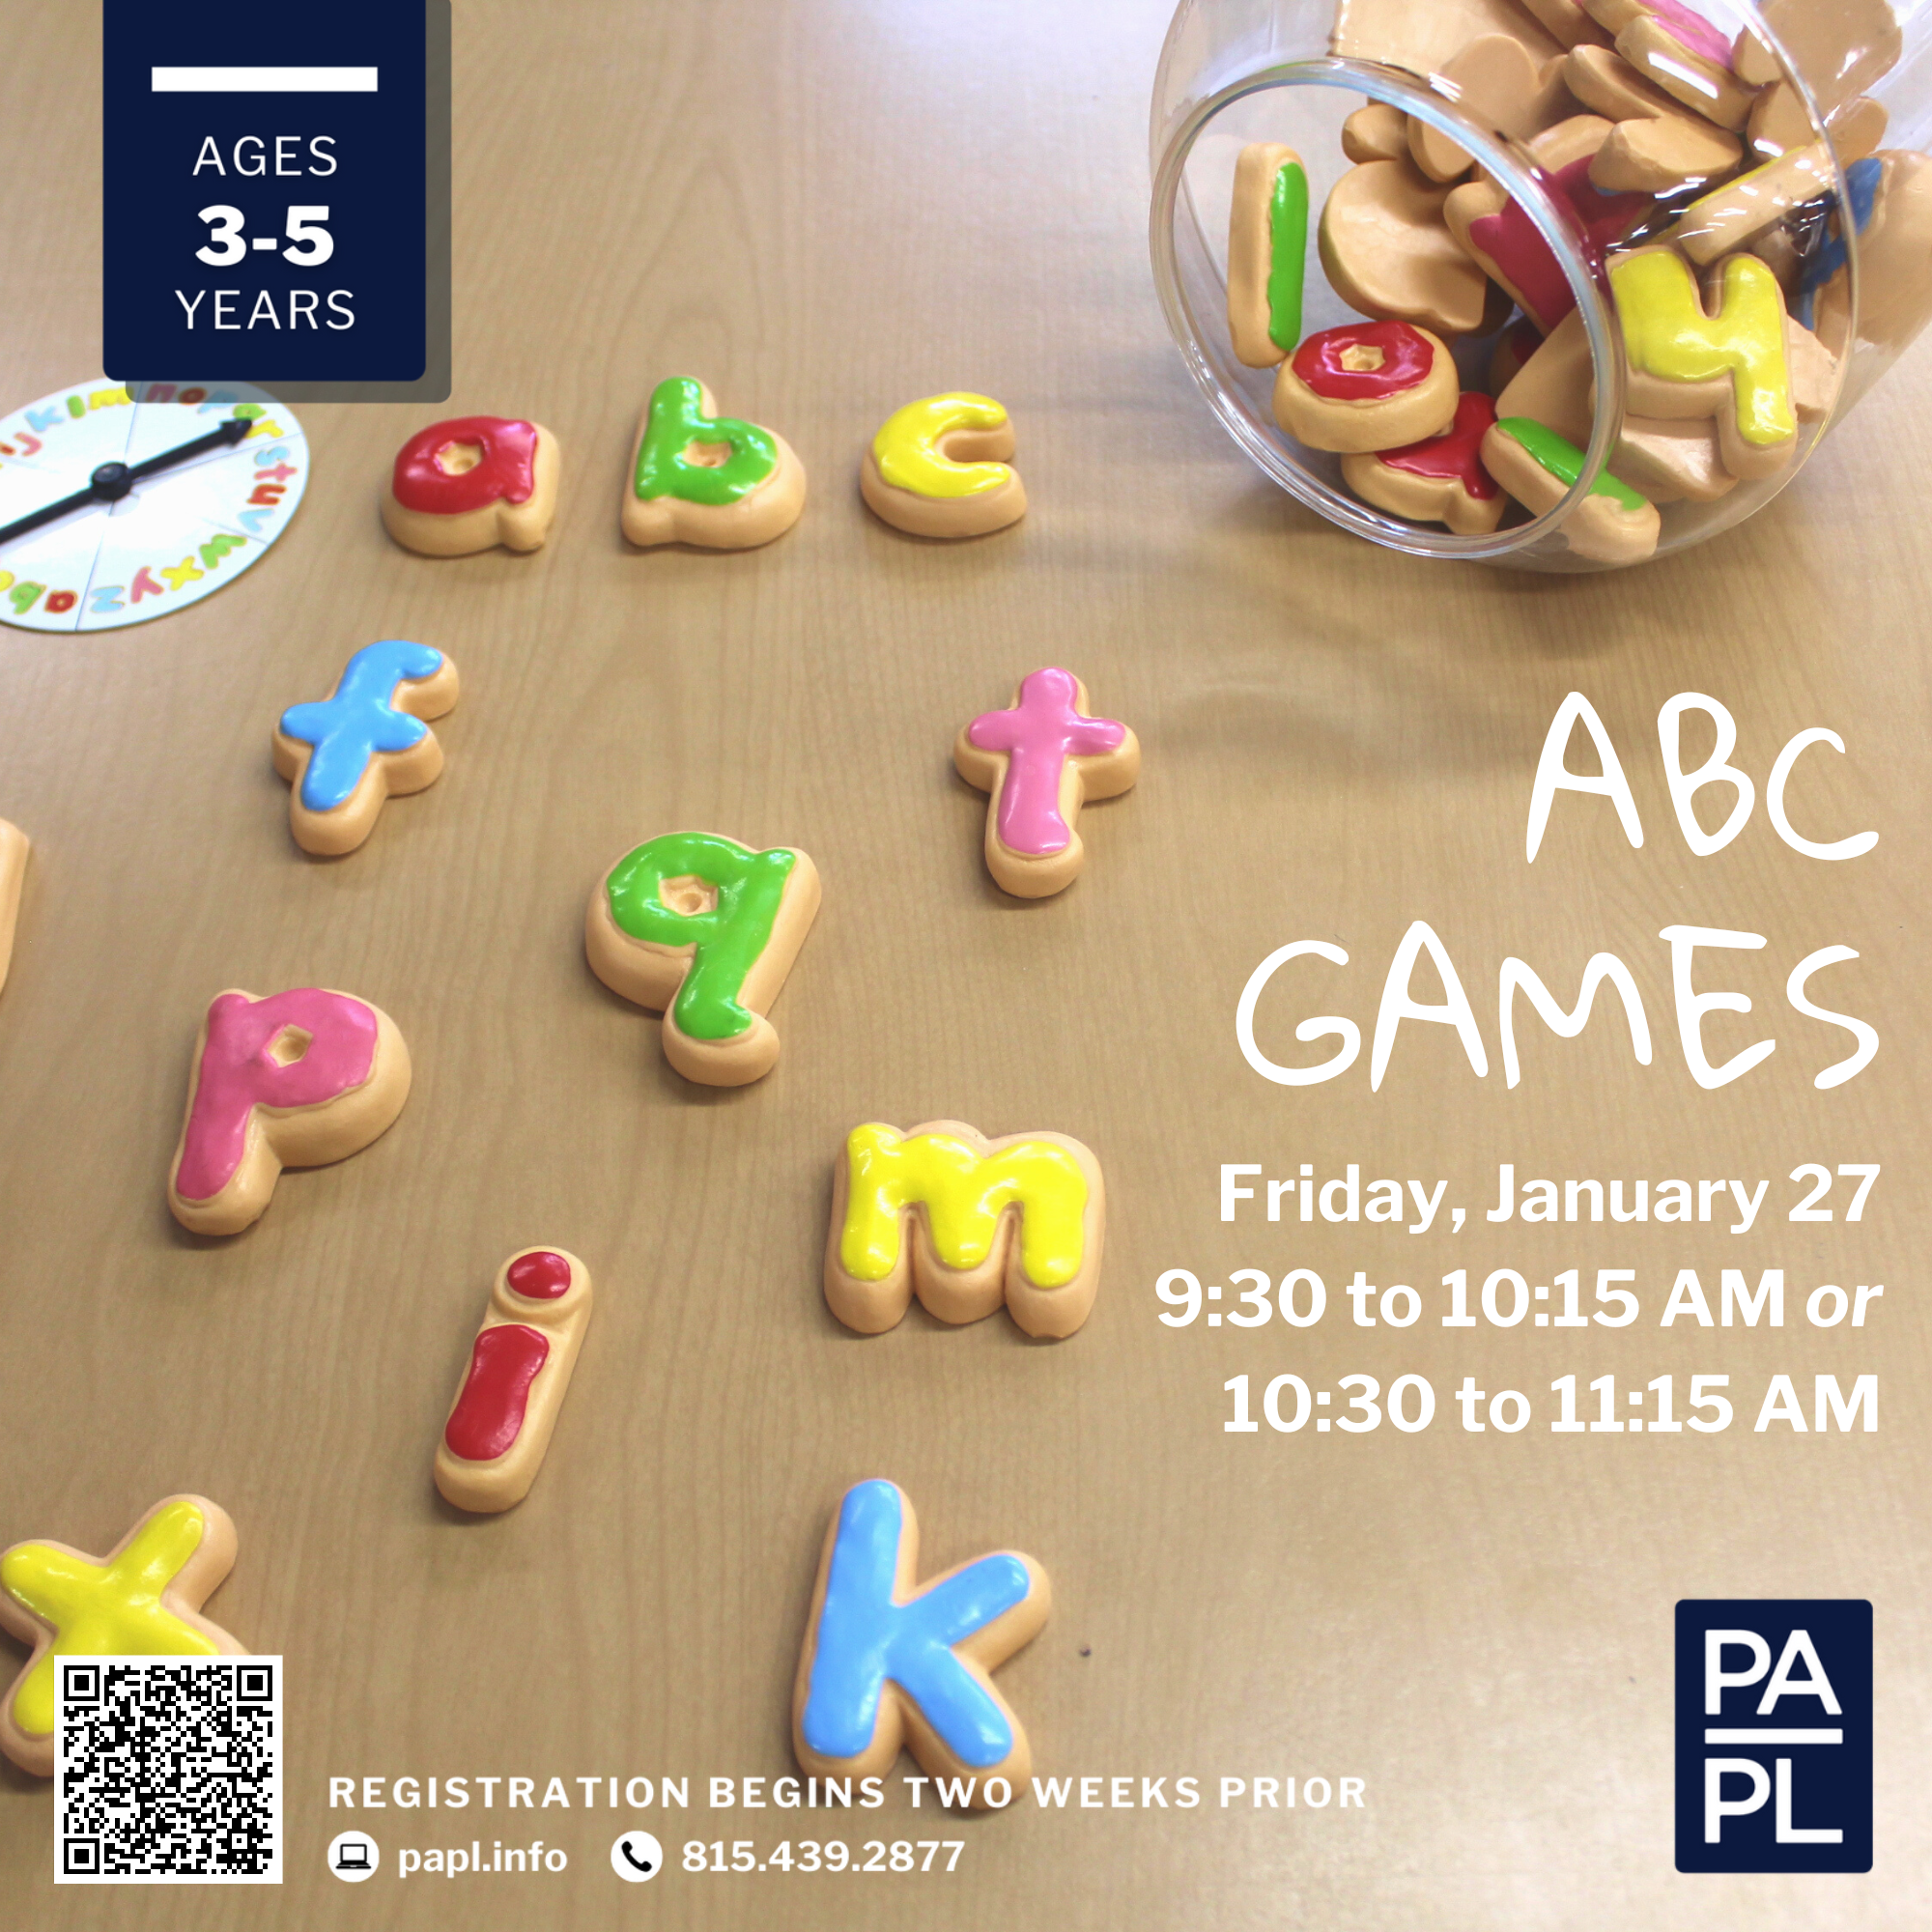 ABC Games 1.27.23 Poster